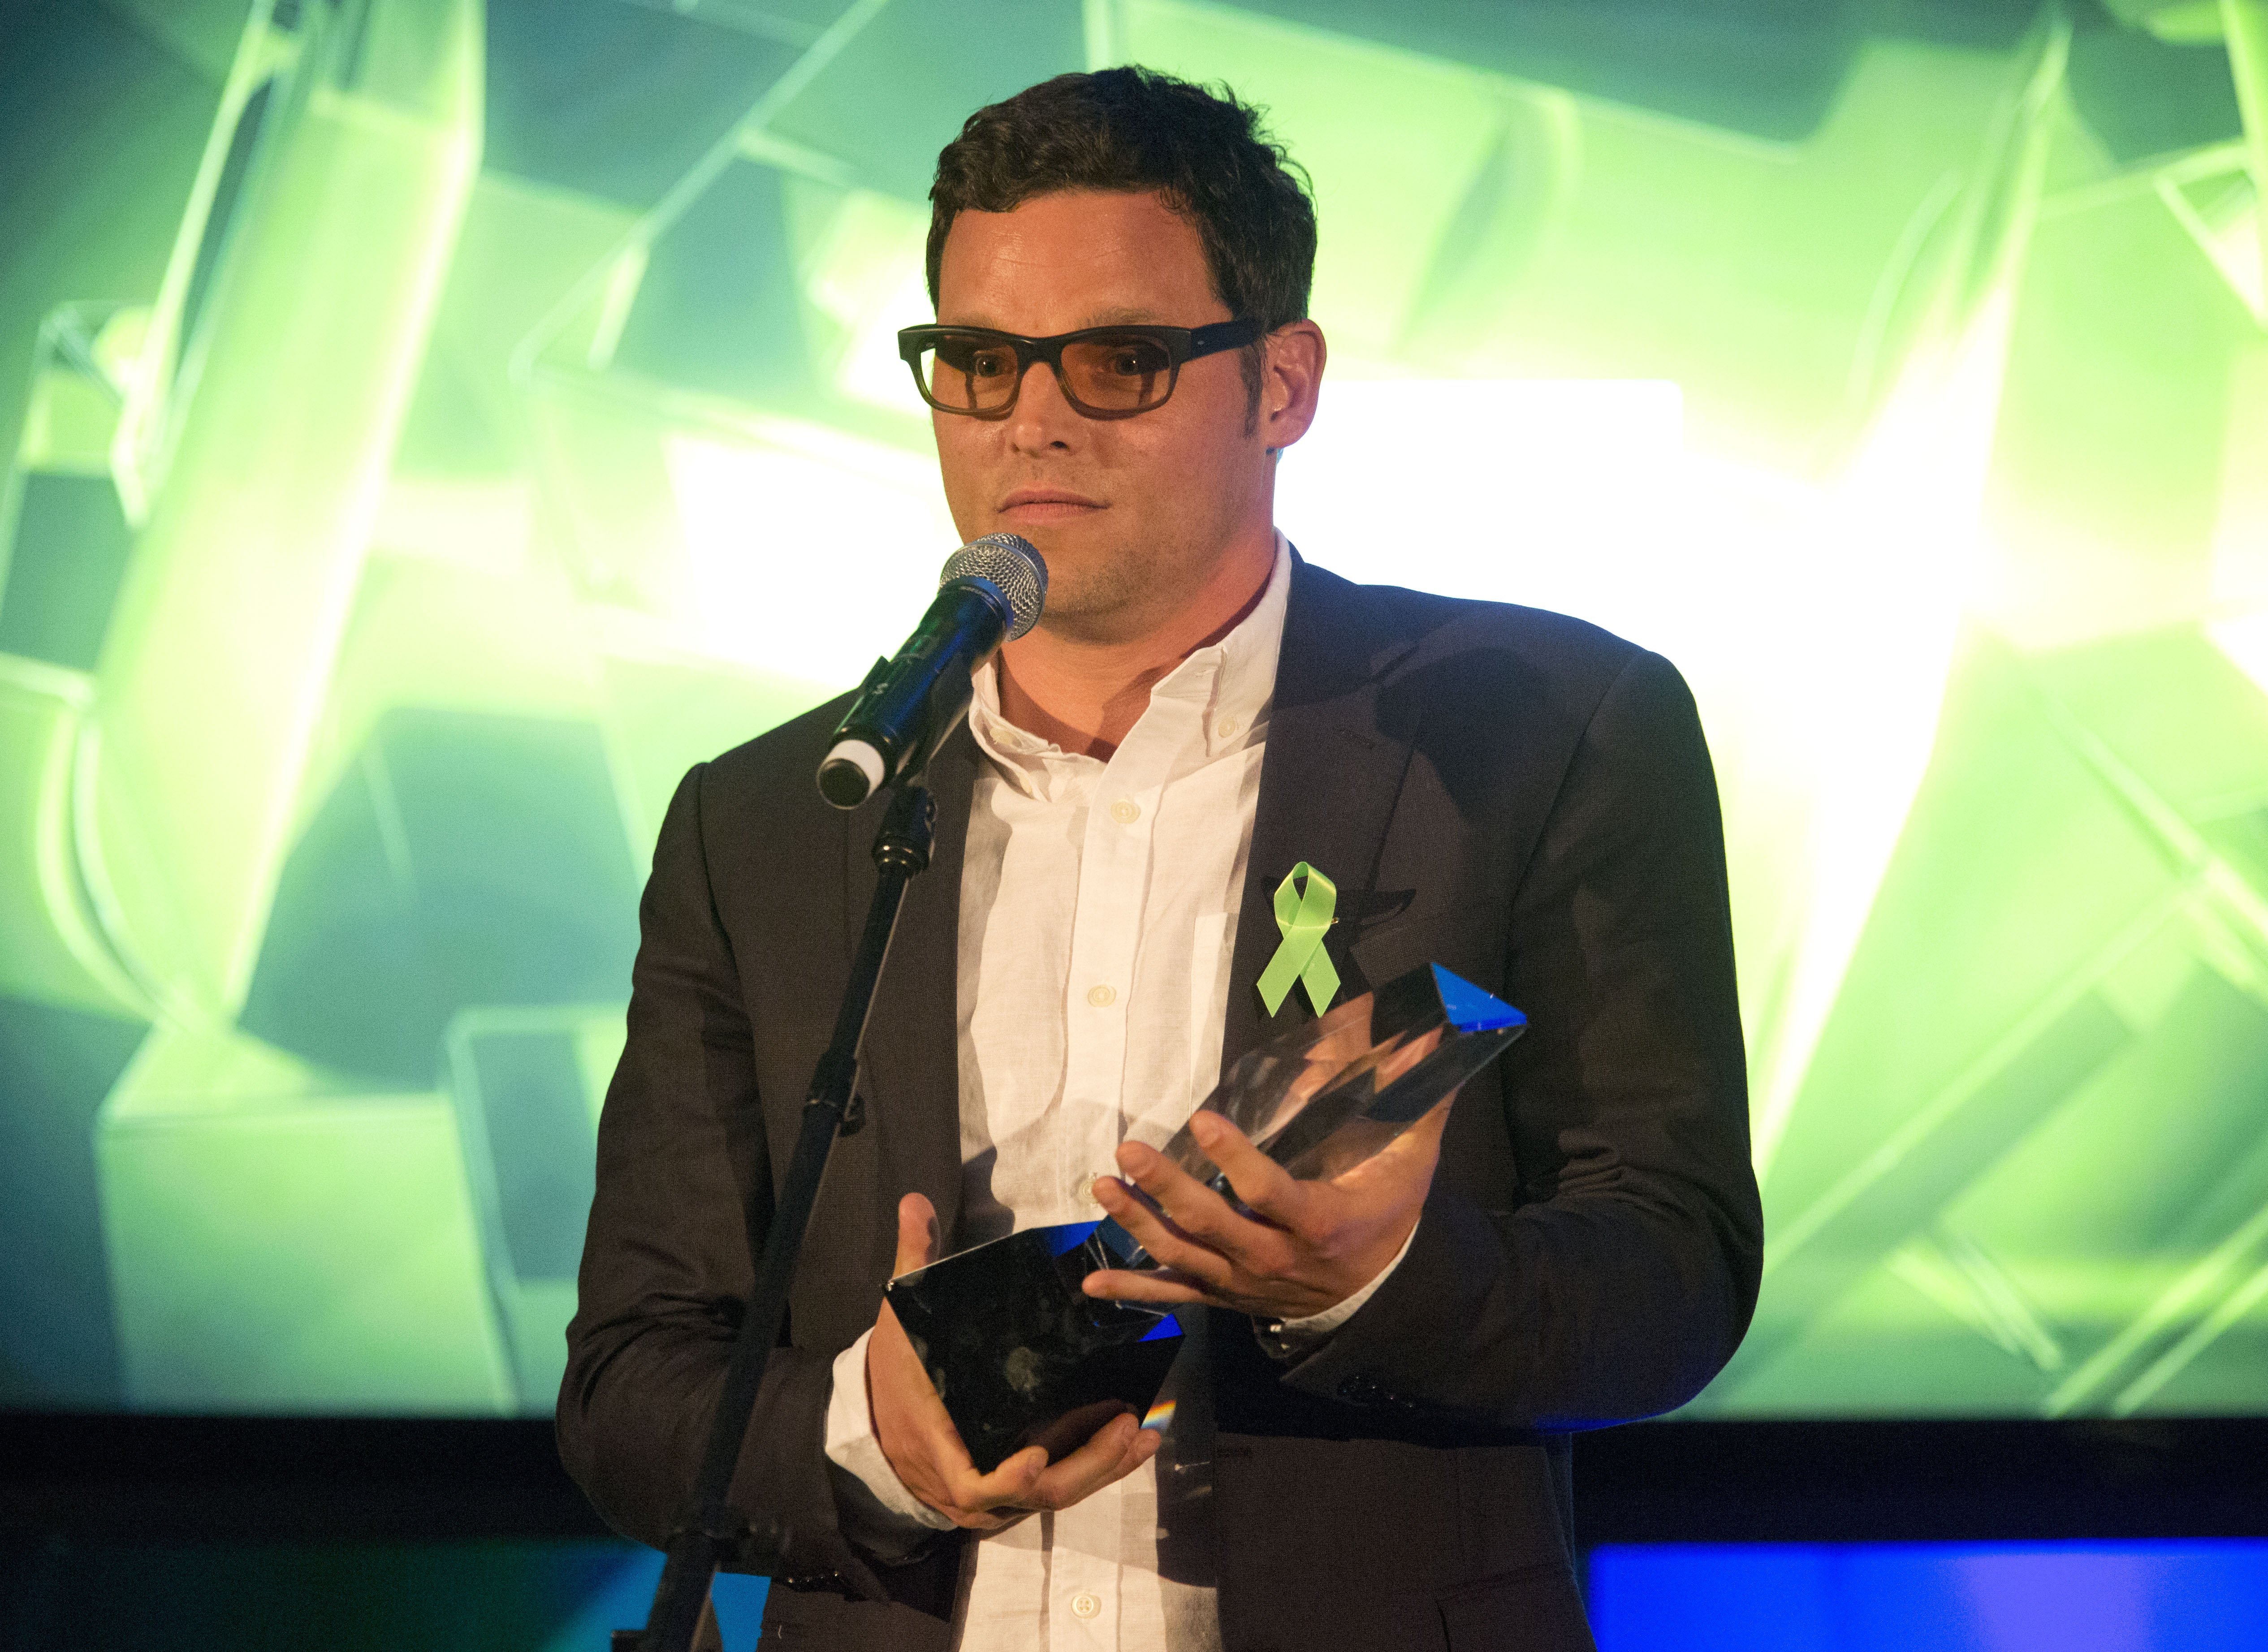  Actor Justin Chambers accepts the 2014 PRISM Award for Male Performance in a Drama Series Multi-Episode Storyline at the 18th Annual PRISM Awards at Skirball Cultural Center on April 22, 2014|Photo: Getty Images